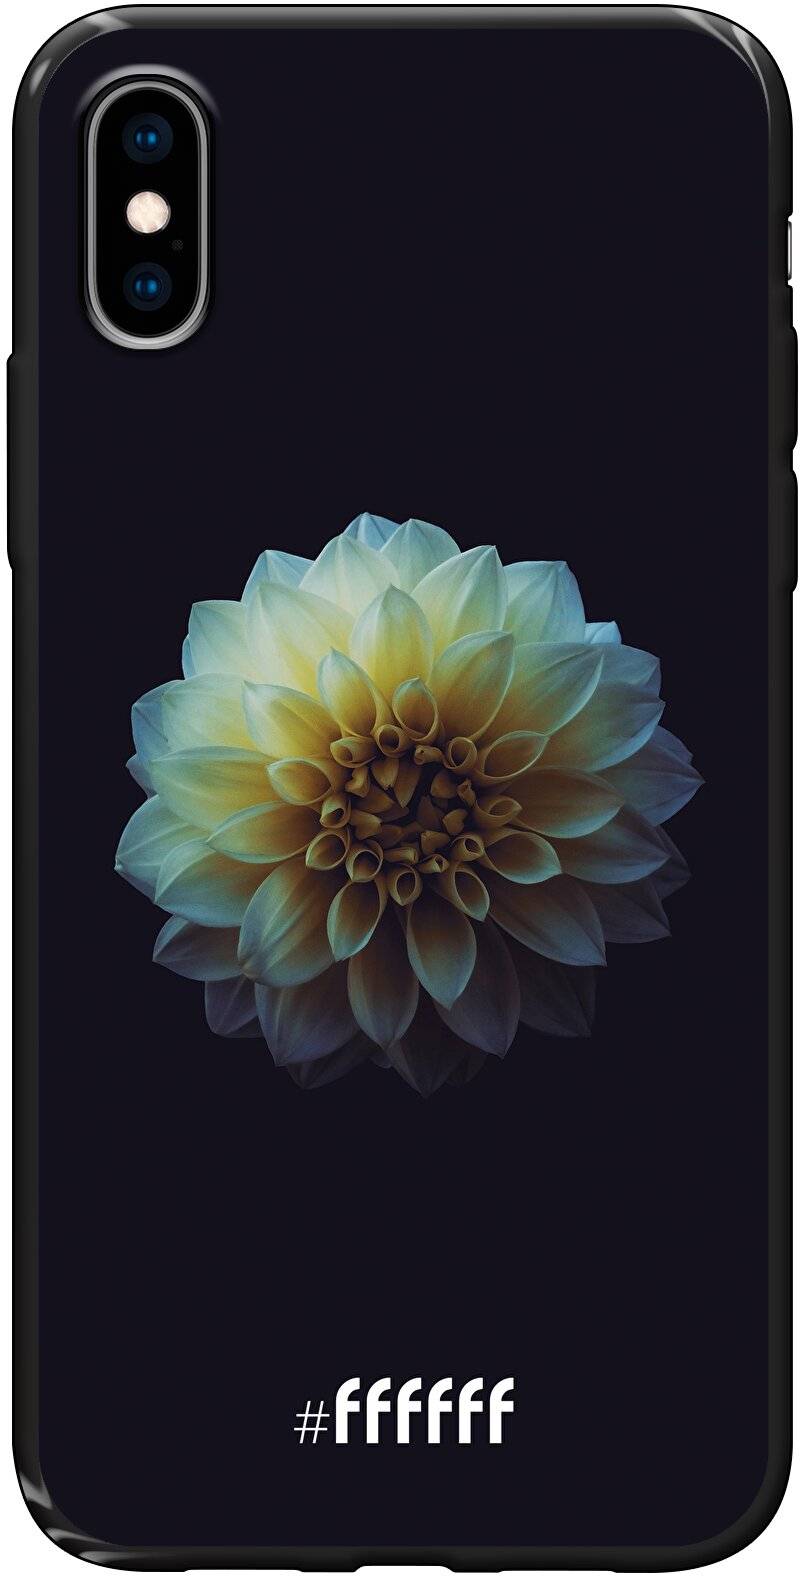 Just a Perfect Flower iPhone X